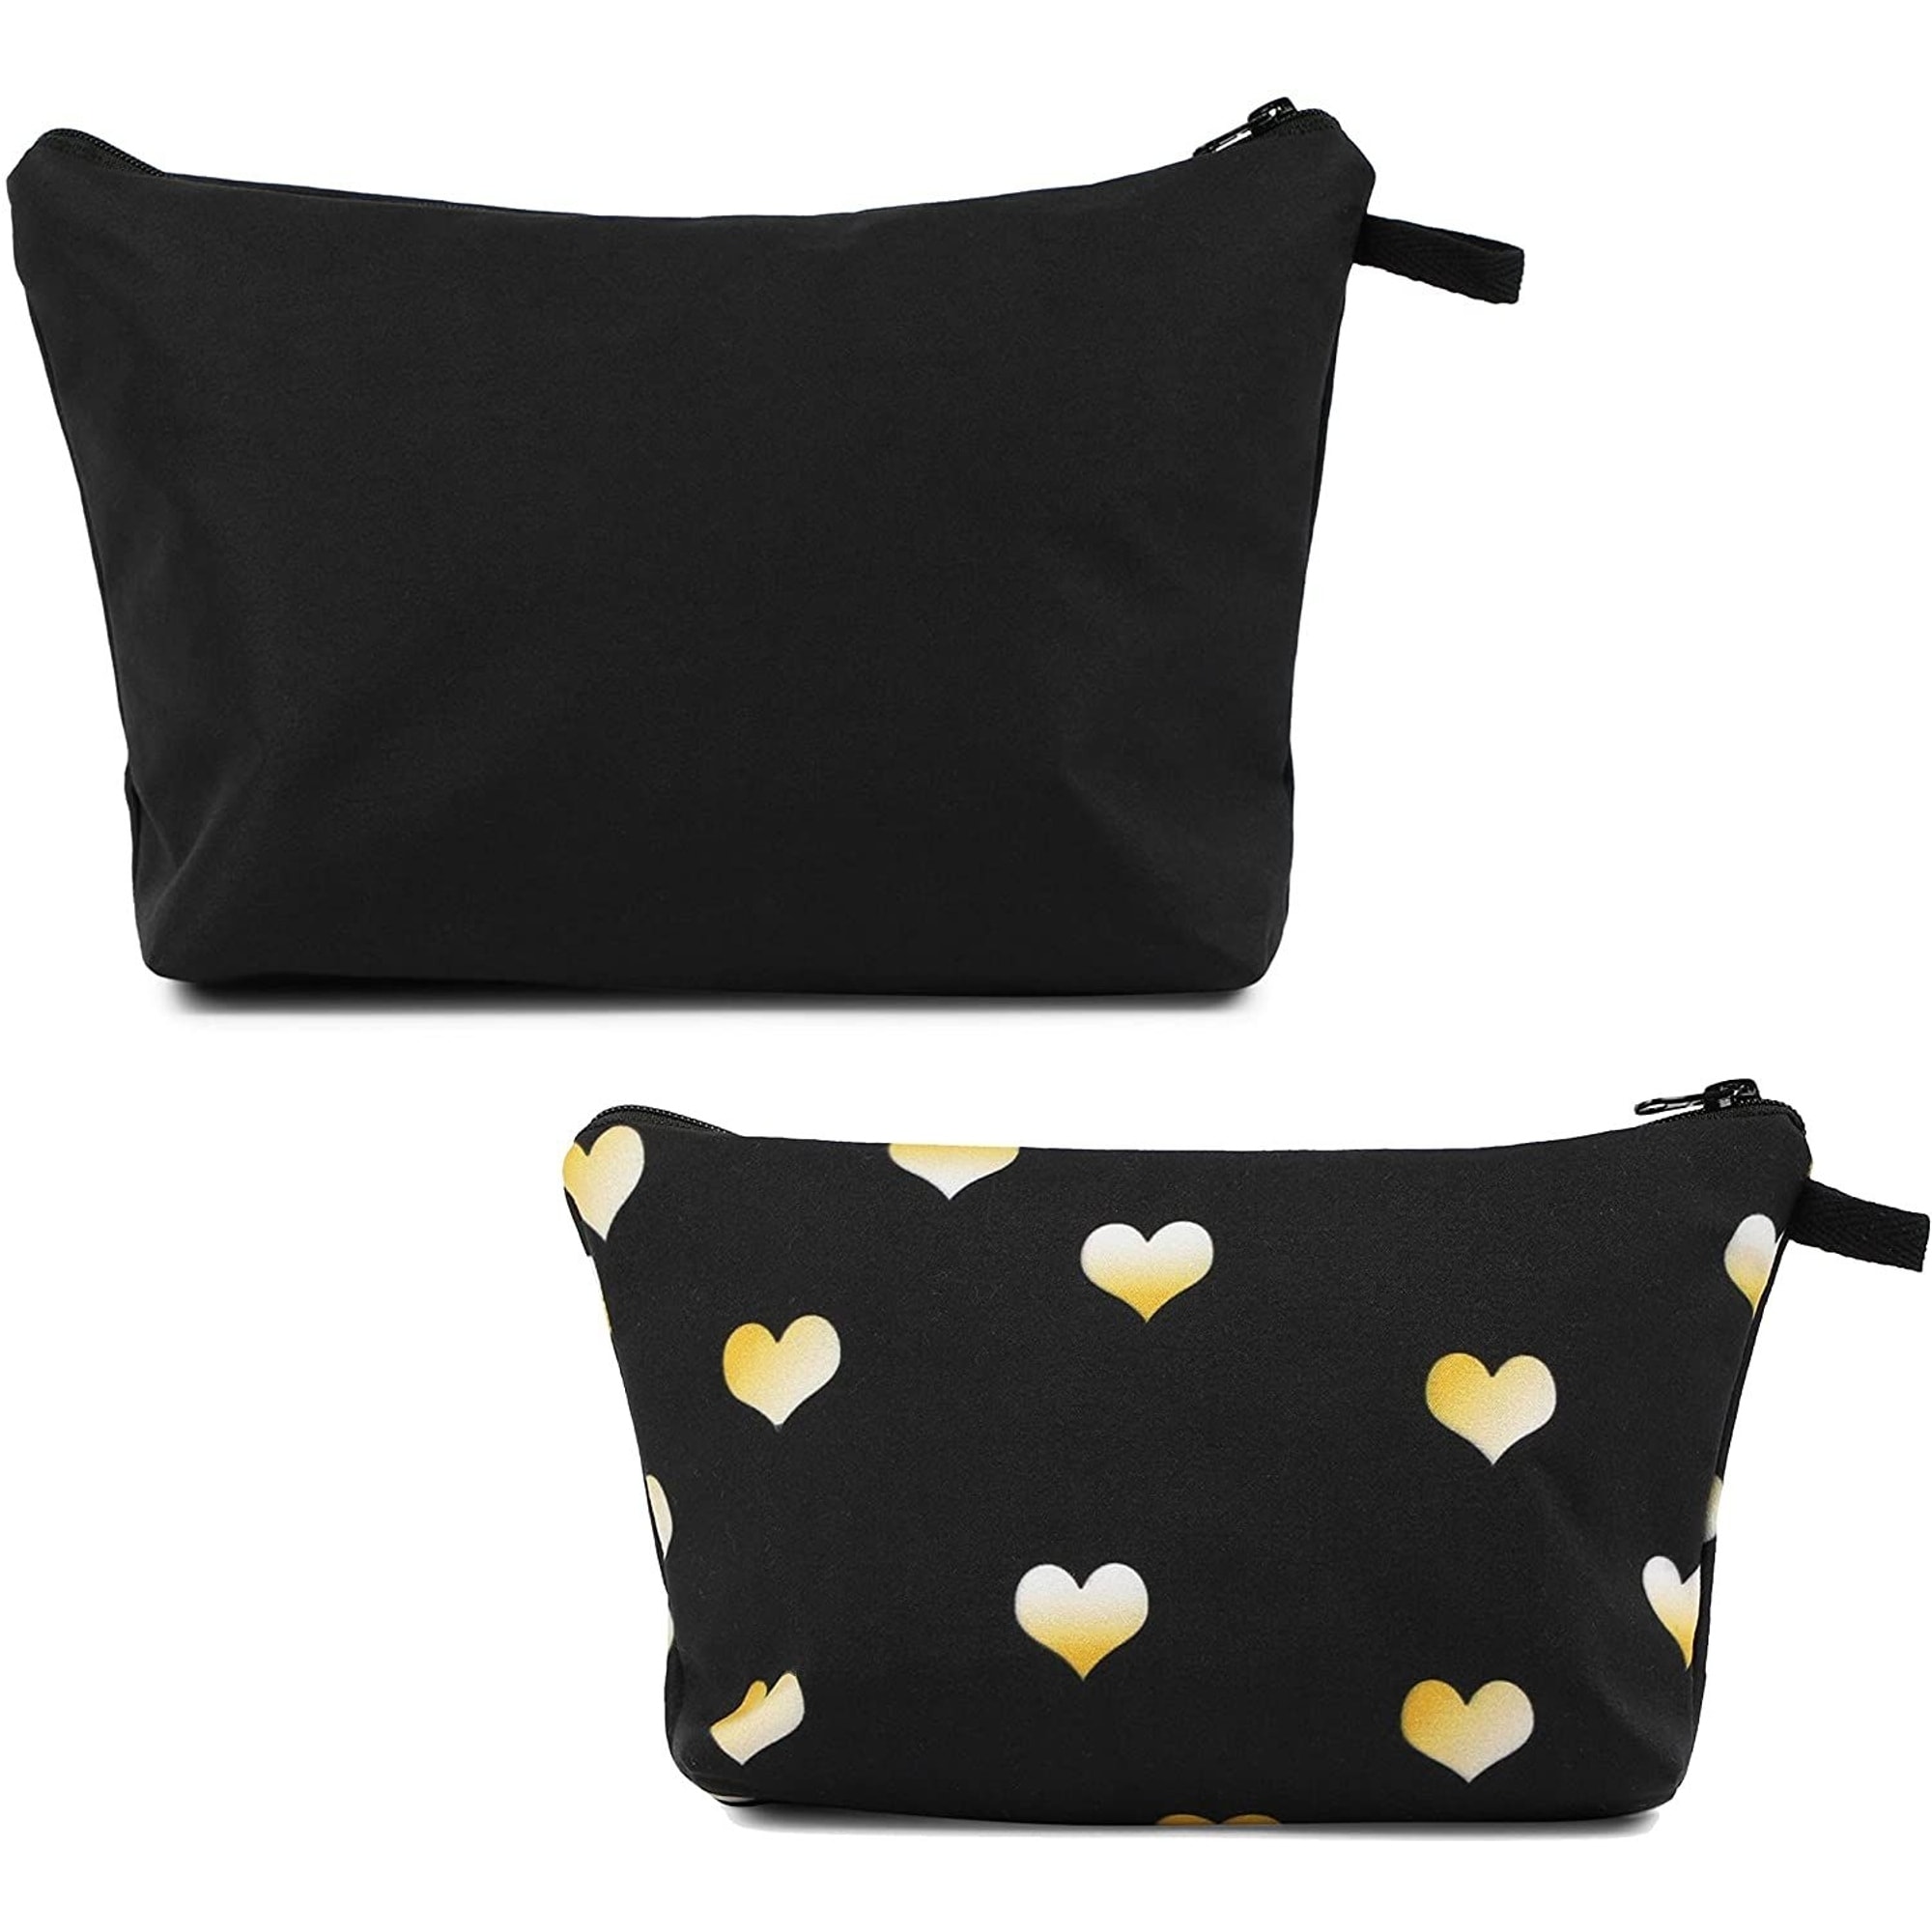 Glamlily Set of 2 Hearts Makeup Travel Bags for Women Girls, Small Cute Cosmetic Storage Pouch, Toiletry Organizer, Black, 2 Sizes